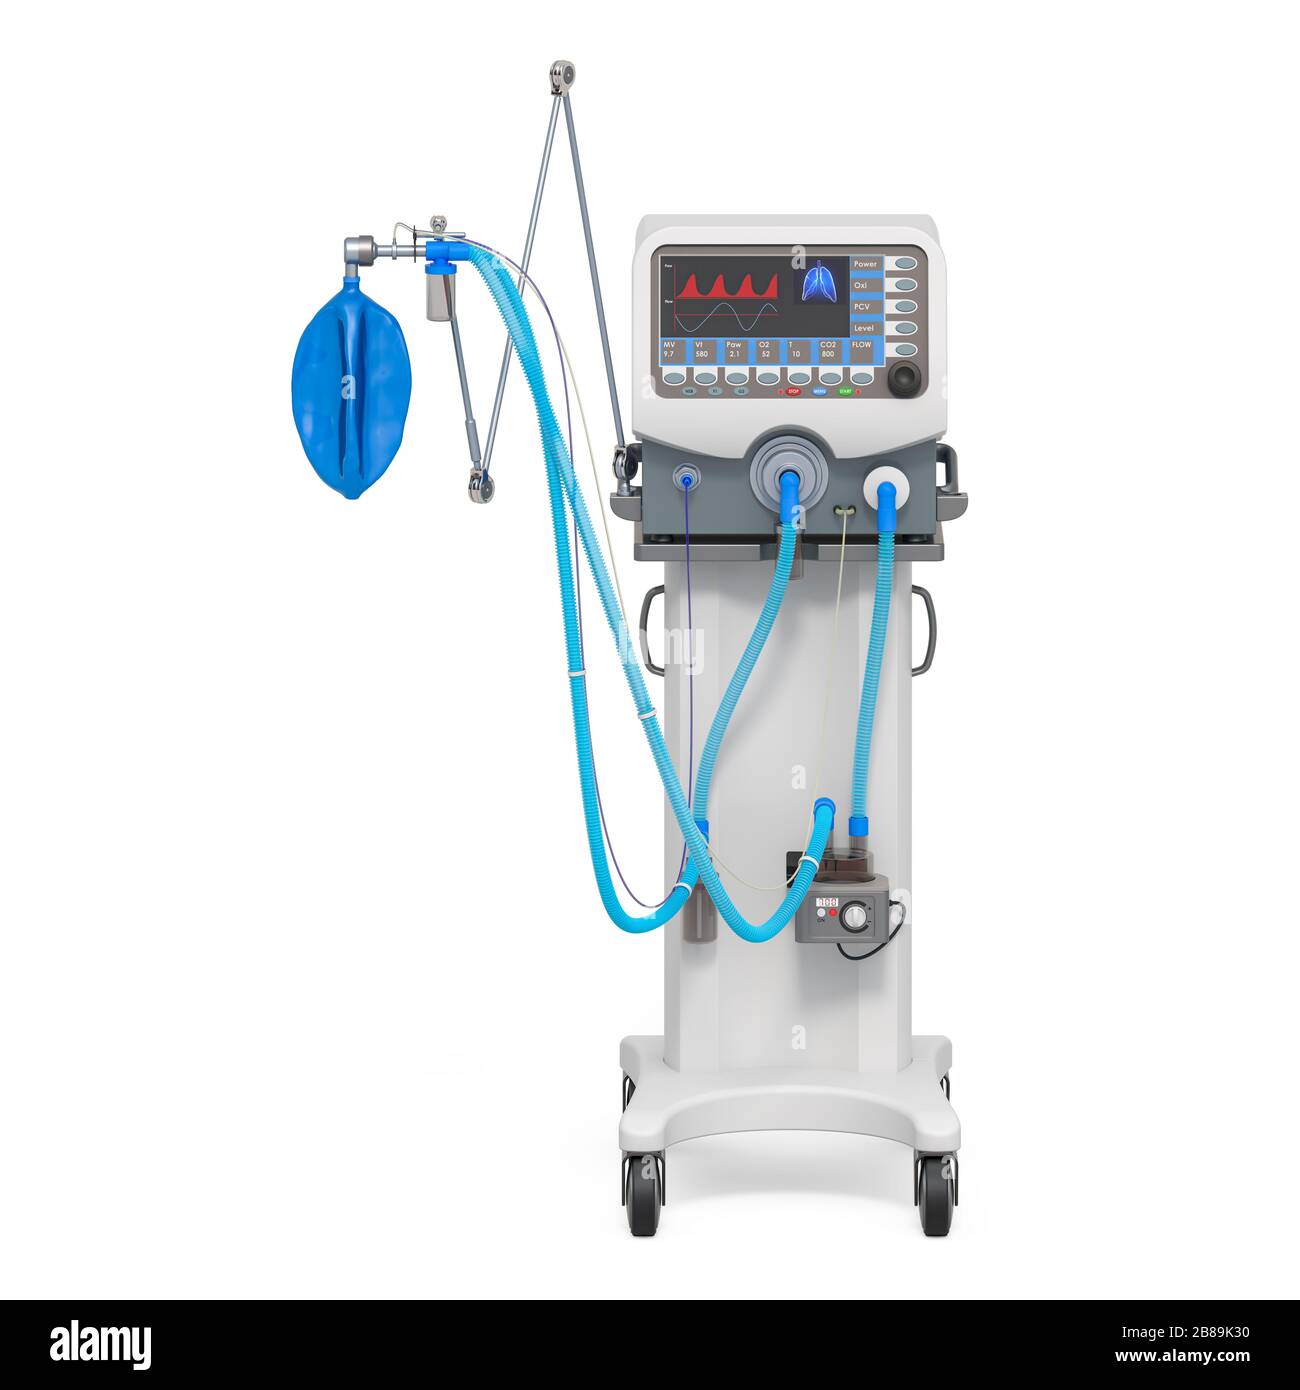 Medical ventilator, 3D rendering isolated on white background Stock Photo